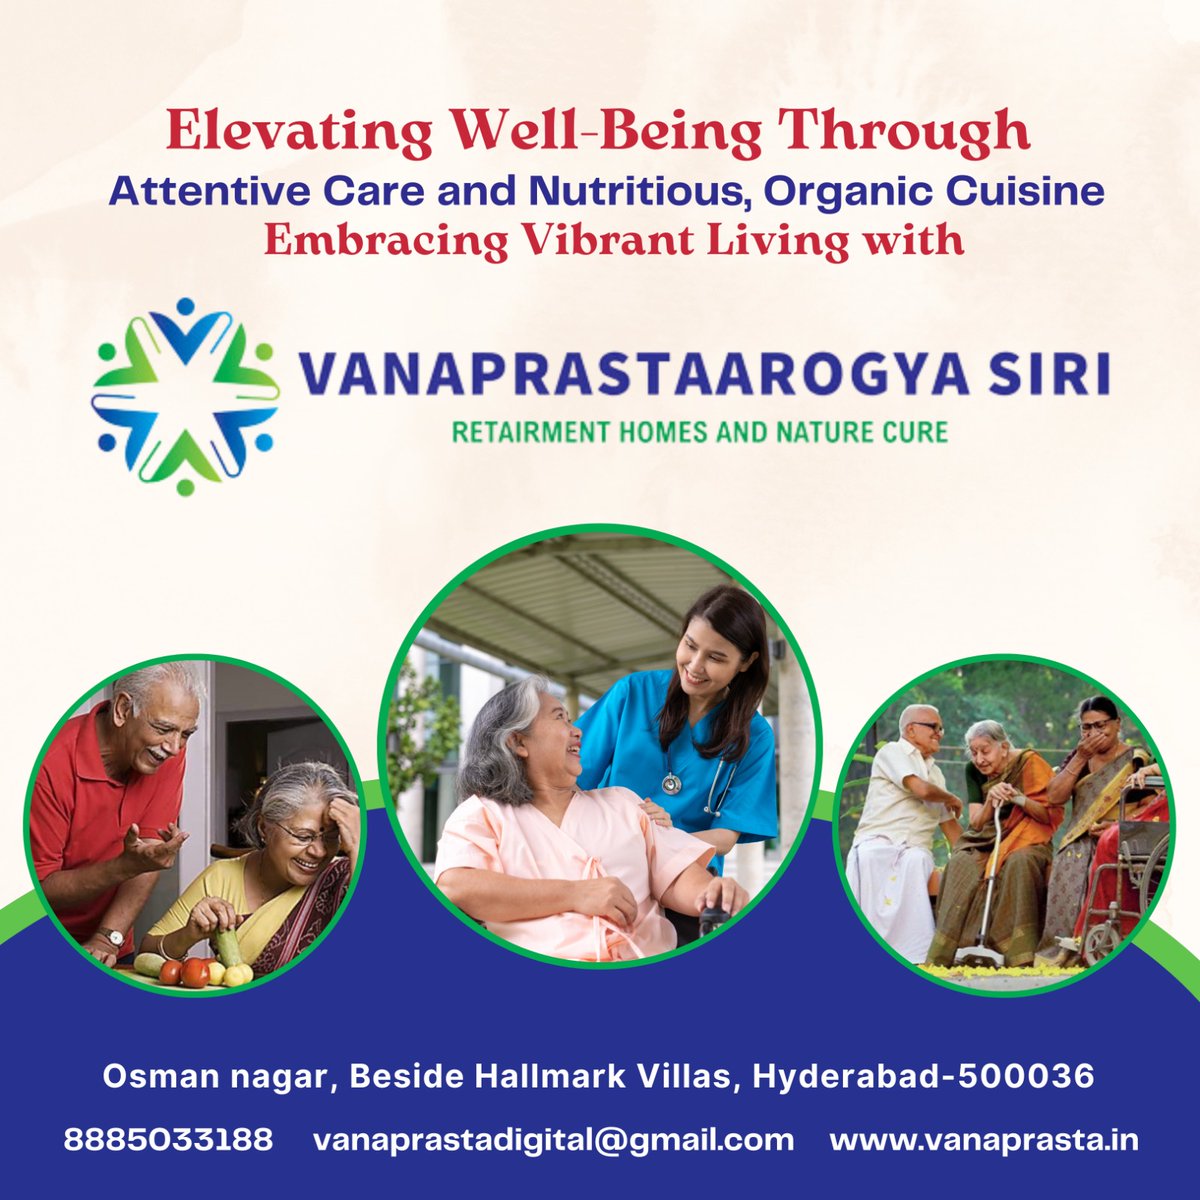 At Vanaprastha Arogya Siri, we're dedicated to elevating well-being through attentive care and nutritious cuisine! 🍲

#VanaprasthaArogyaSiri #WellnessJourney #HealthyLiving #bestorganicmealsnearme #findapro #recommended #recommendation #retirementhome #retirement #retirement